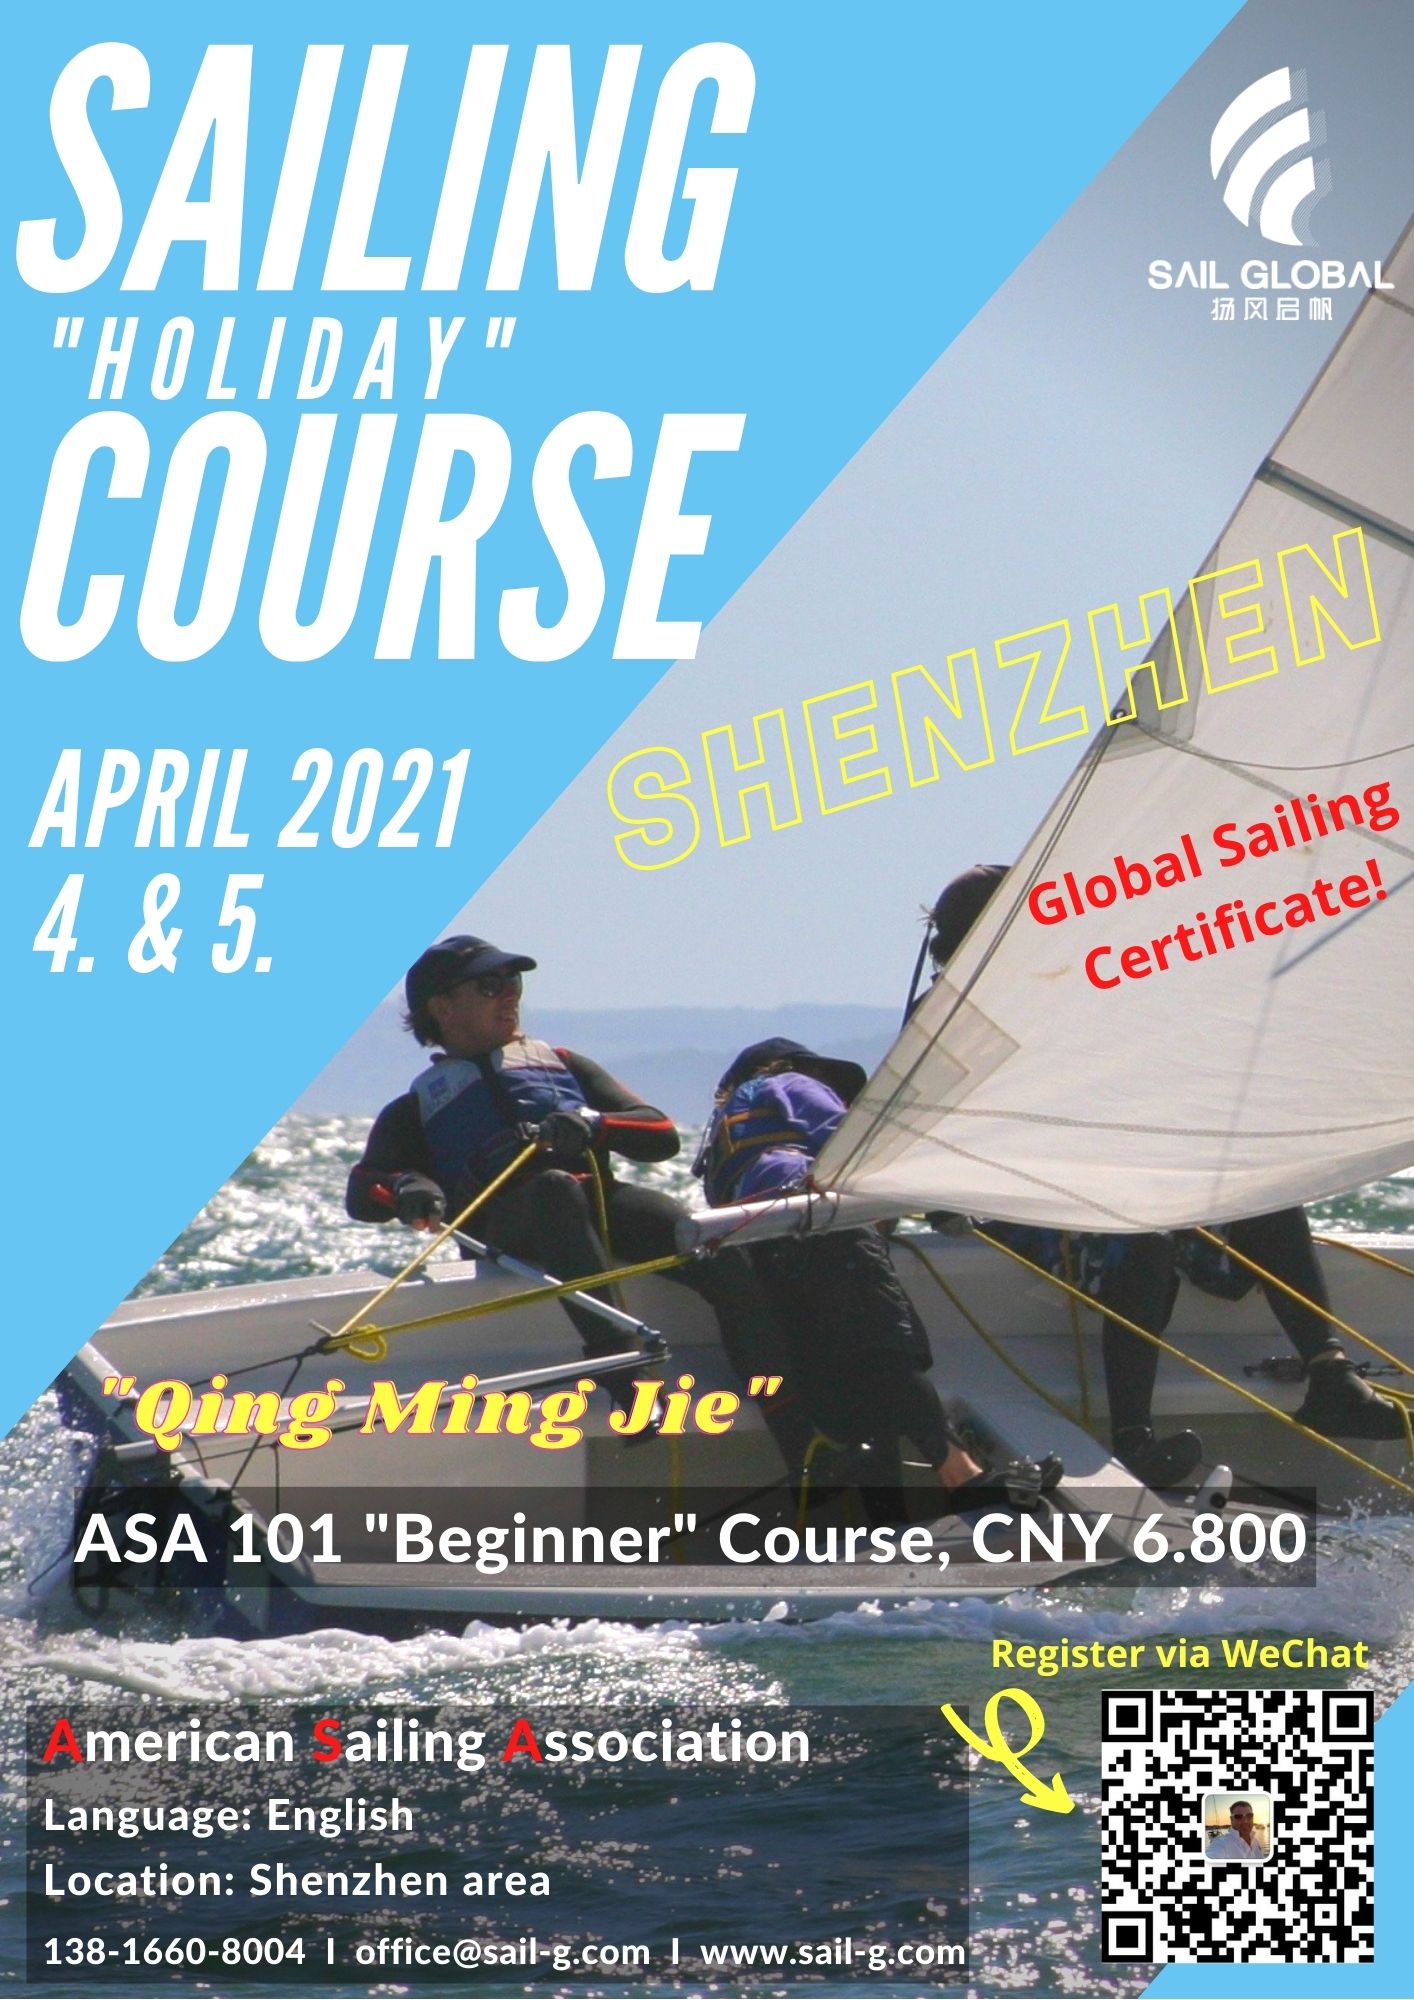 Qingming Festival Holiday ASA 101 sailing courses for beginners at Shenzhen Marriott Hotel Golden Bay – Shenzhen Events